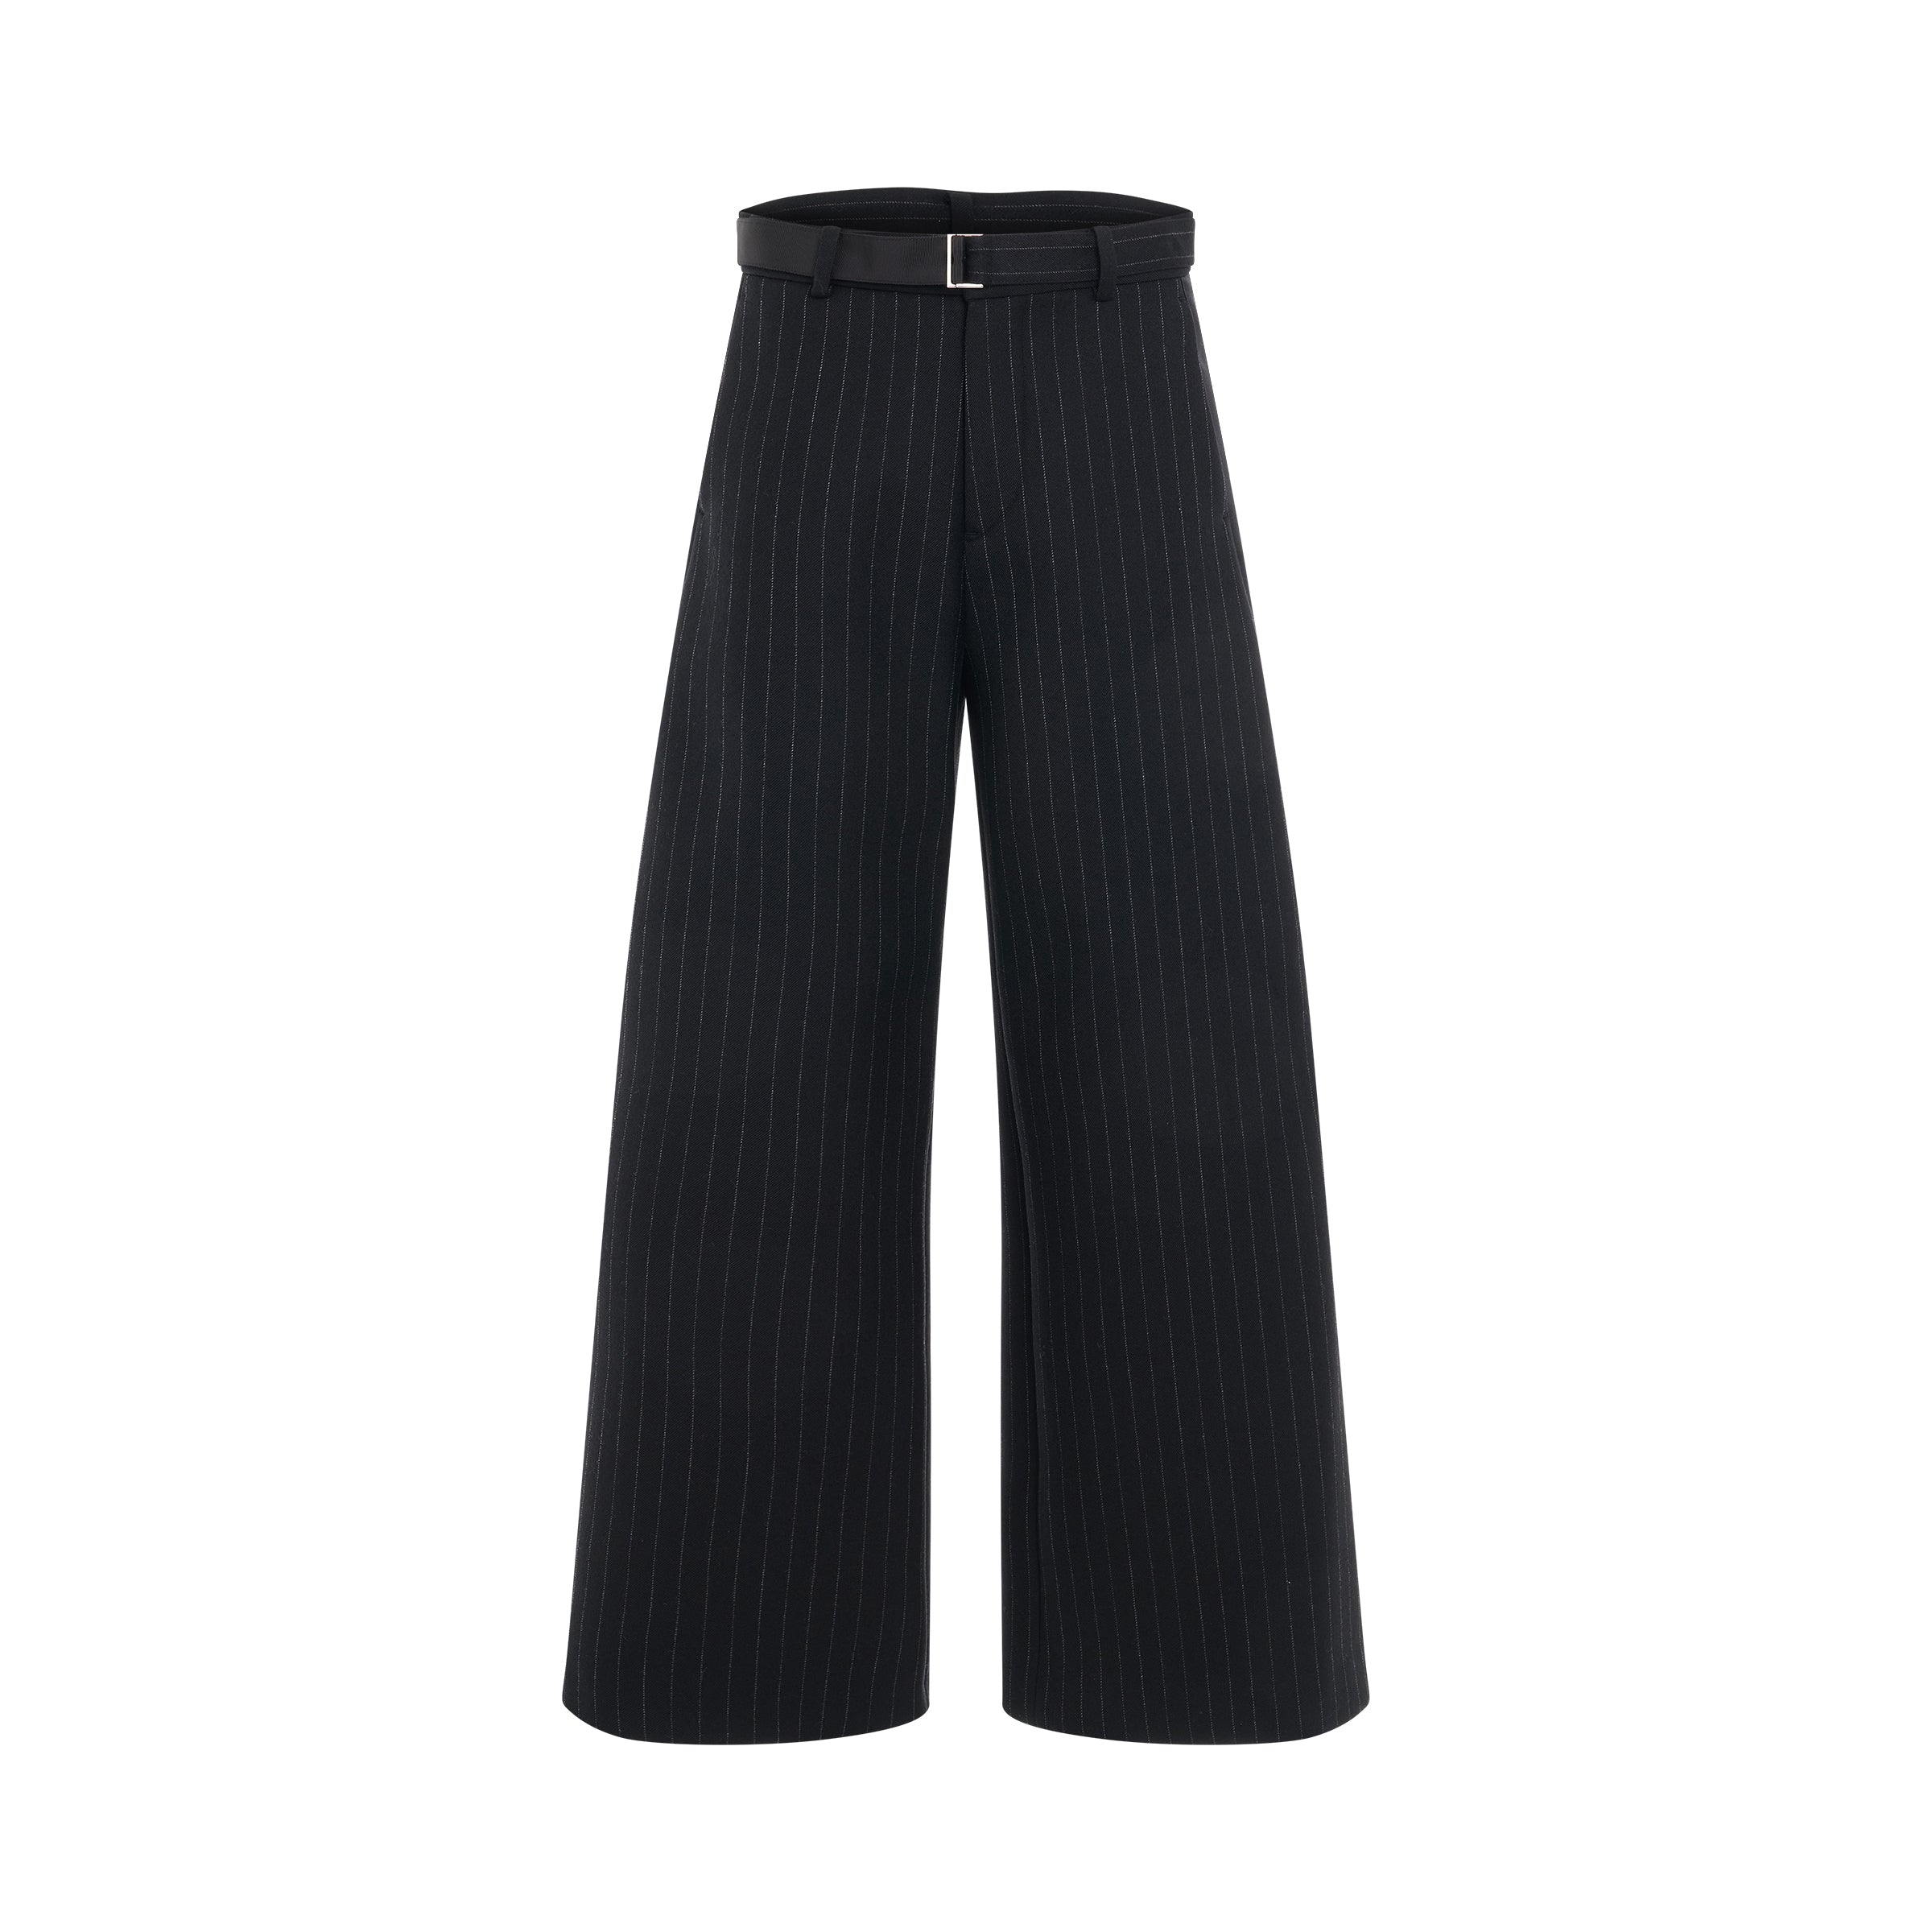 sacai chalk stripe bonding pants in black sold out sold out sale earn ...